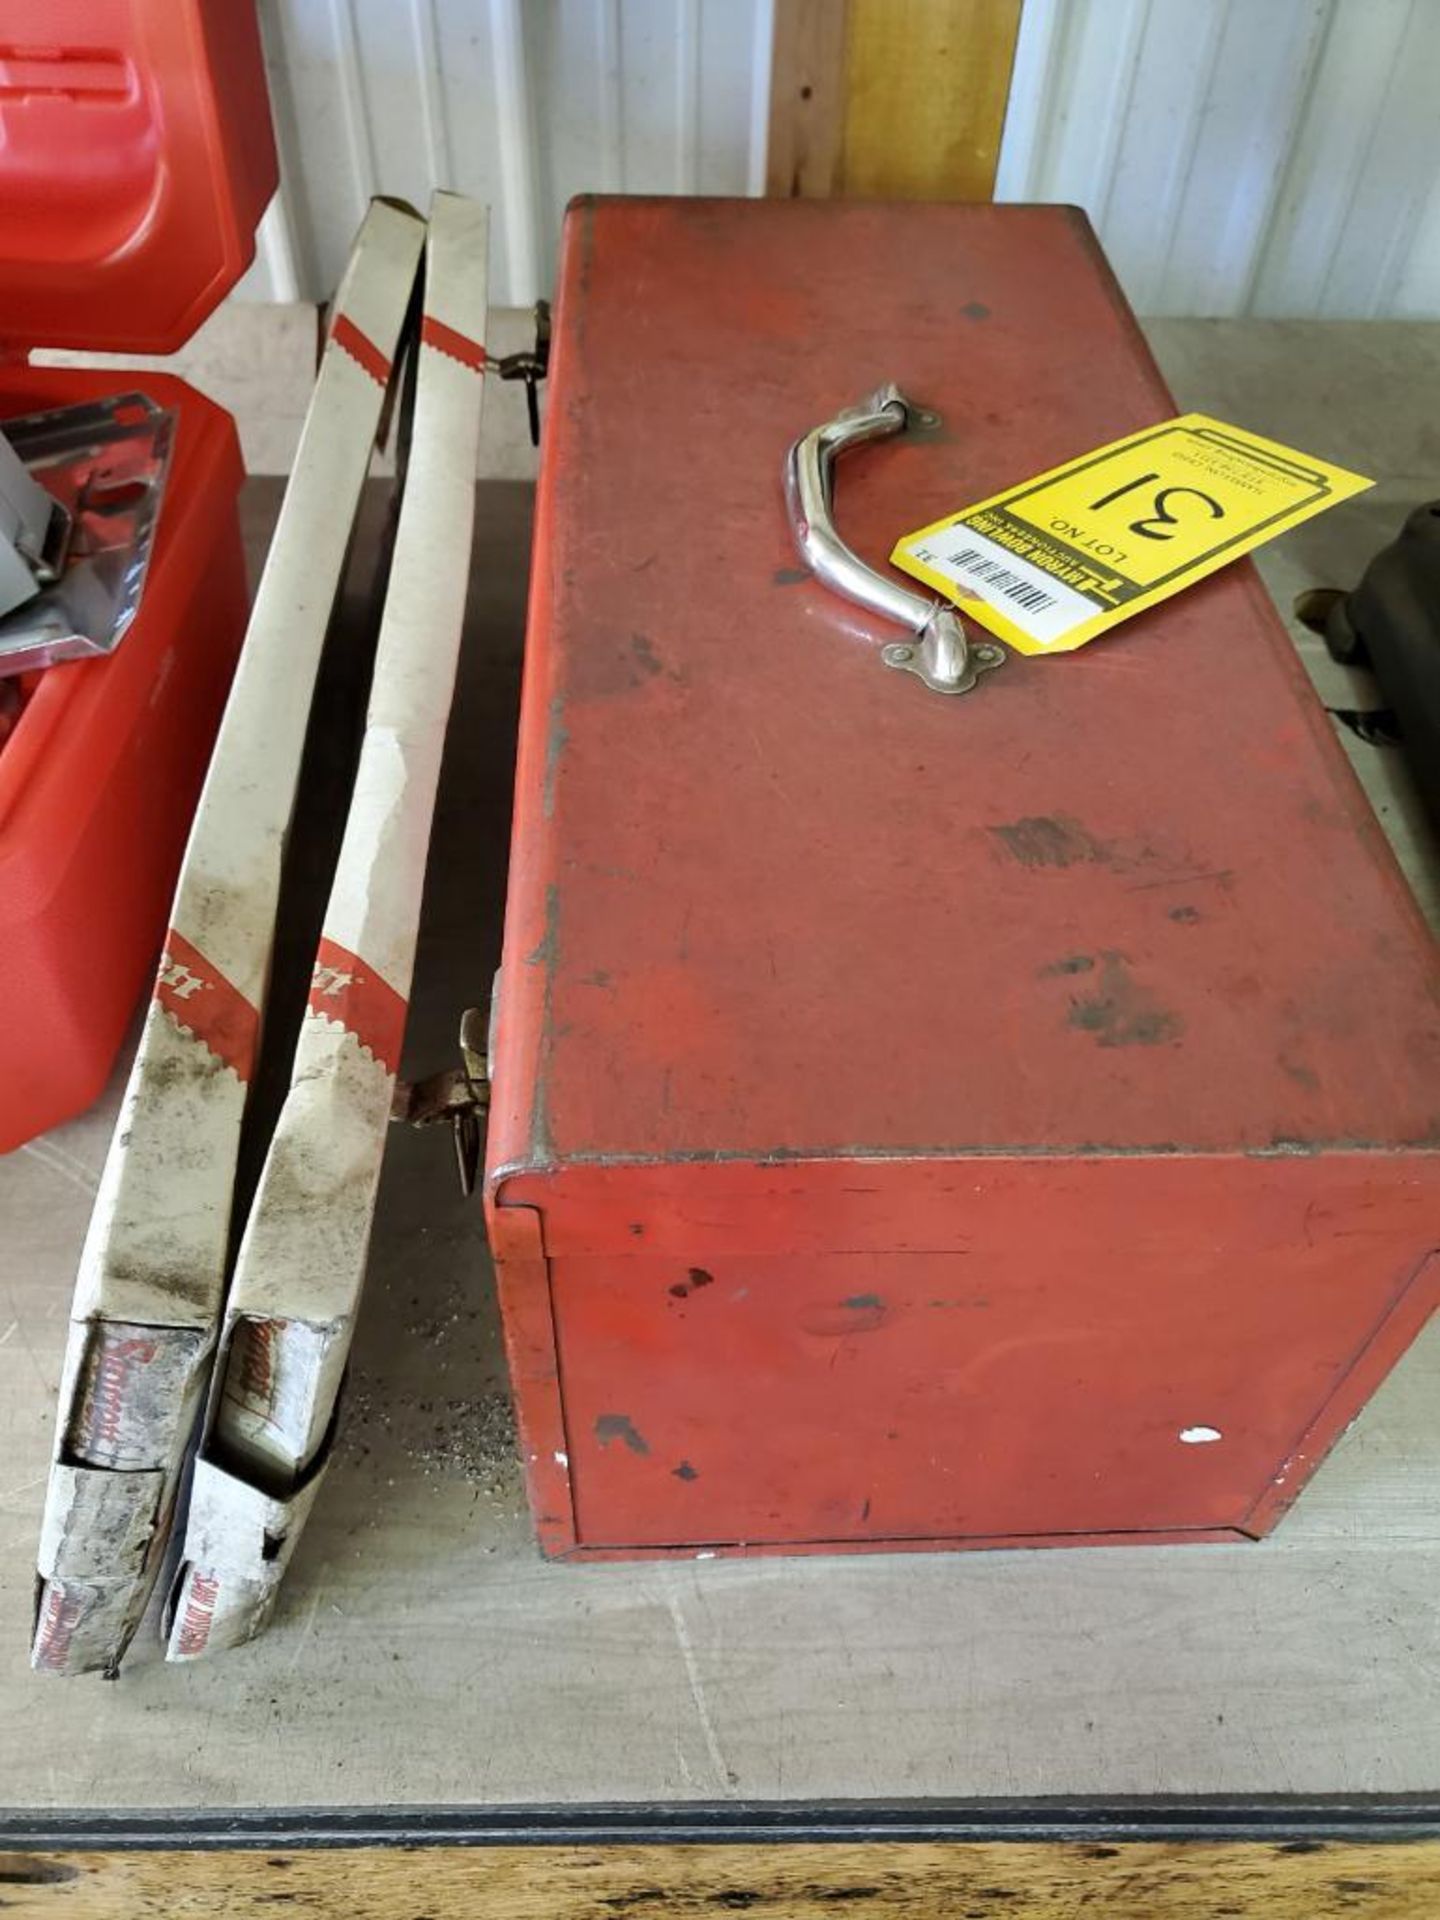 MILWAUKEE HEAVY DUTY PORTABLE BAND SAW WITH SPARE BLADE BANDS